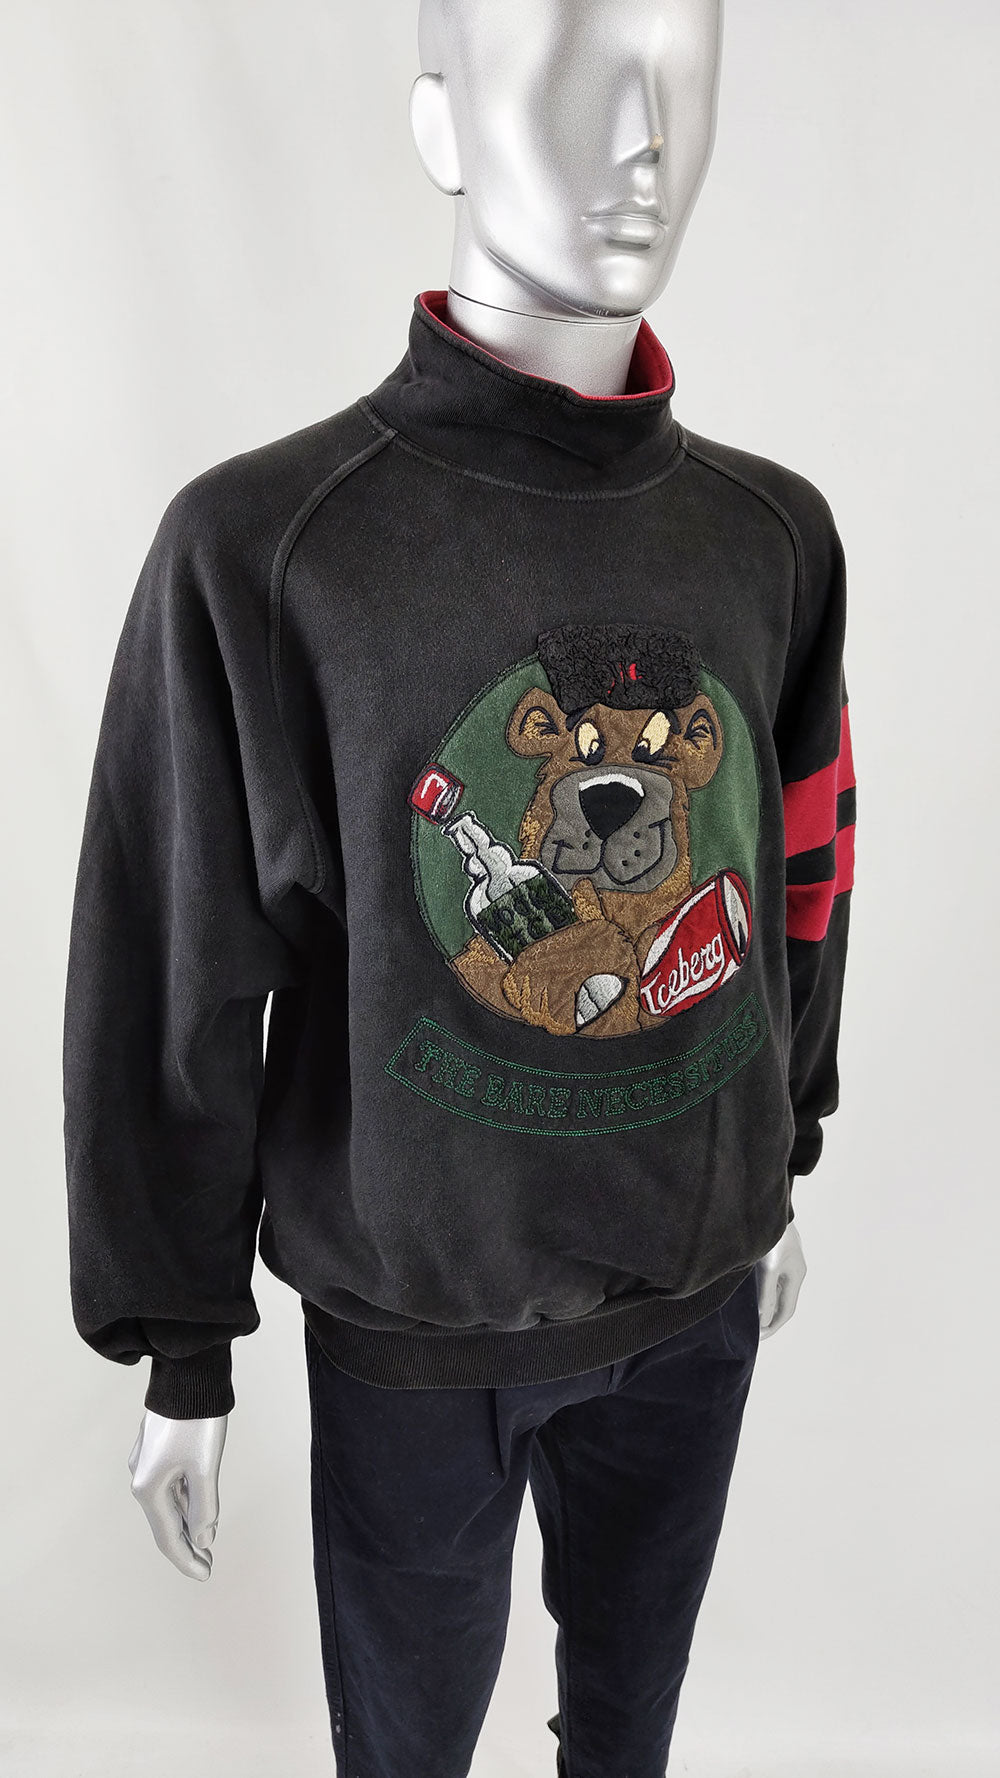 A vintage iceberg sweater featuring a Russian Soviet bear embroidered on the front.